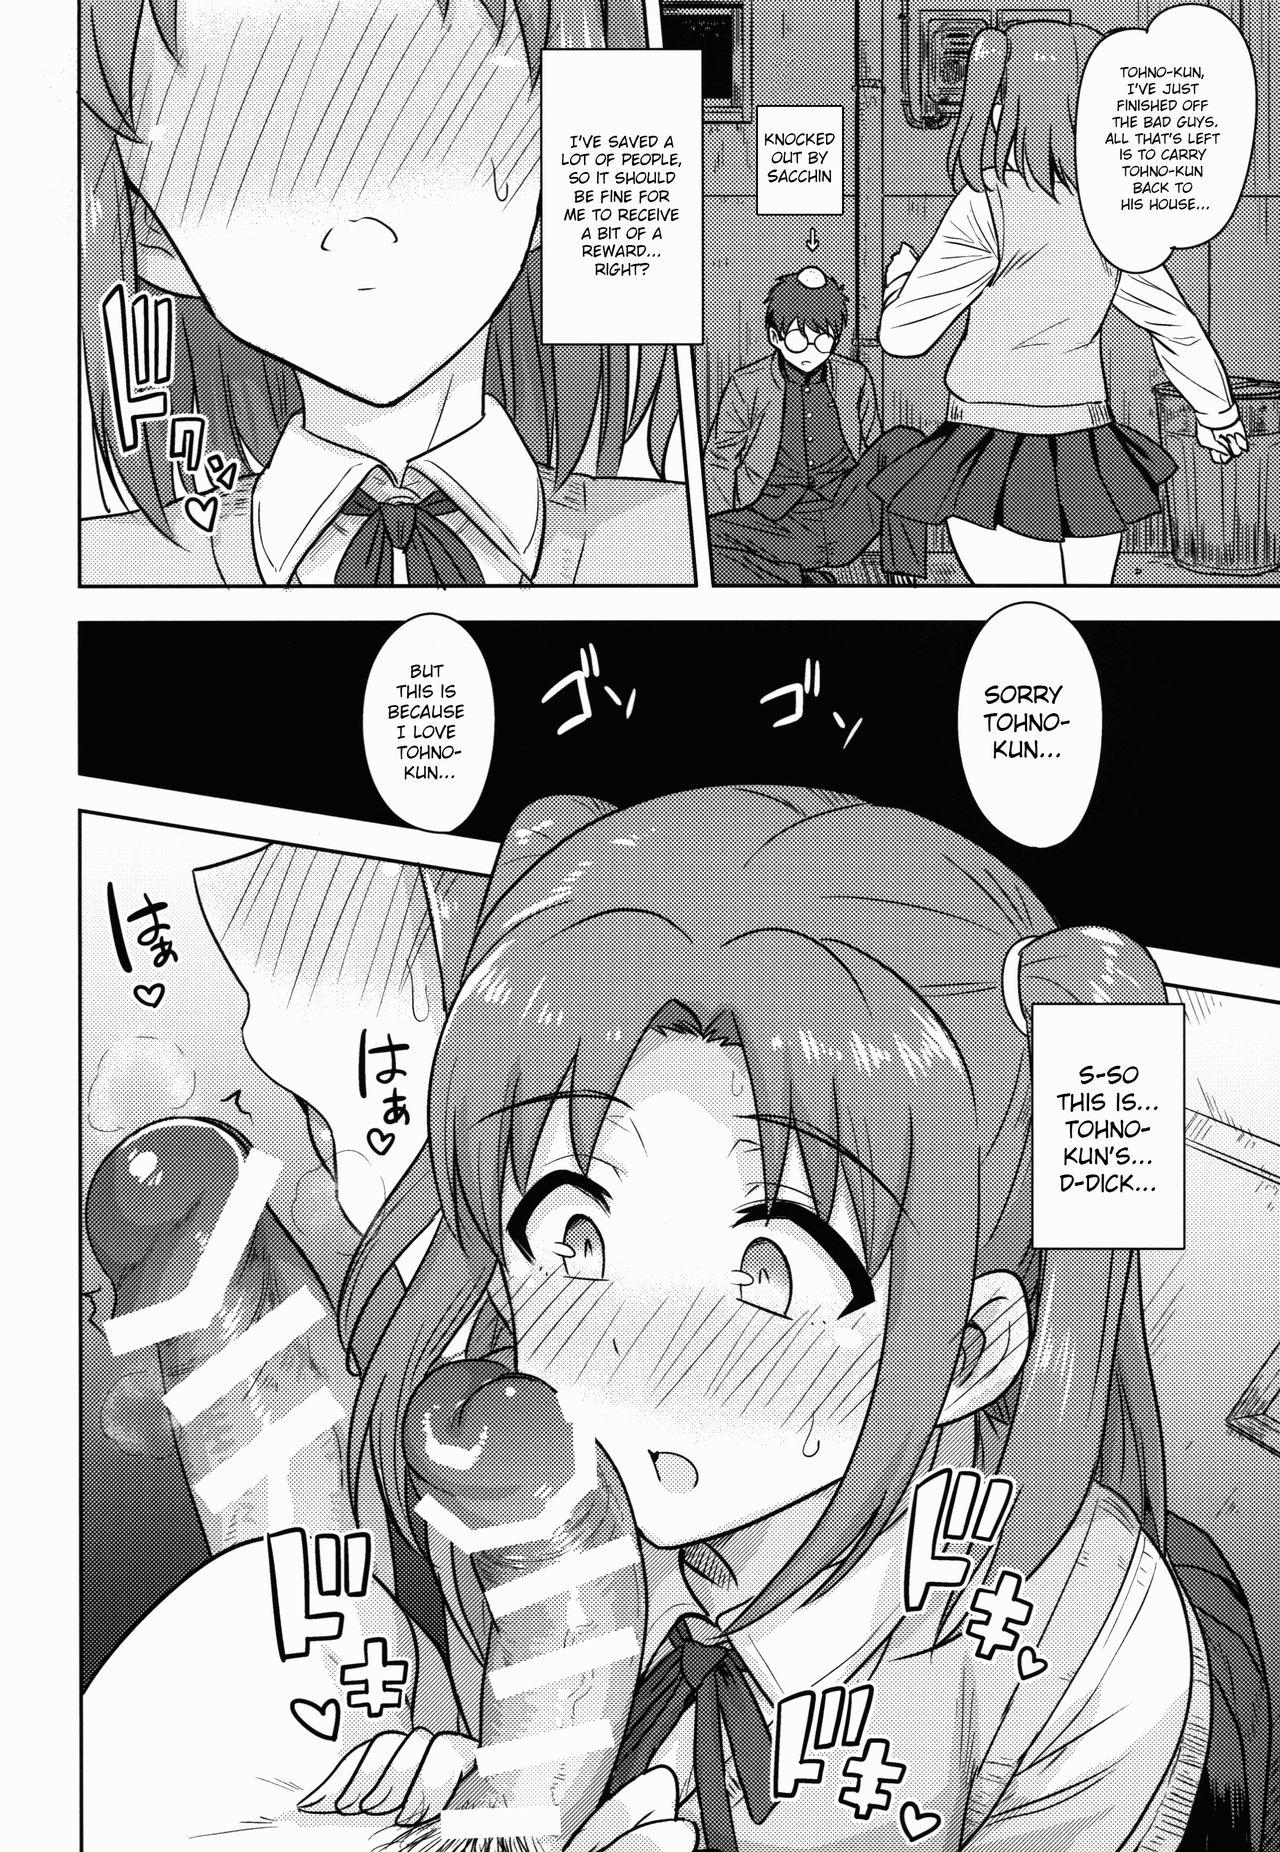 Dando Aru Hi no Futari MelBlo Hen | A Certain Day with Each Other Melty Blood Hen - Tsukihime Wet Pussy - Page 9